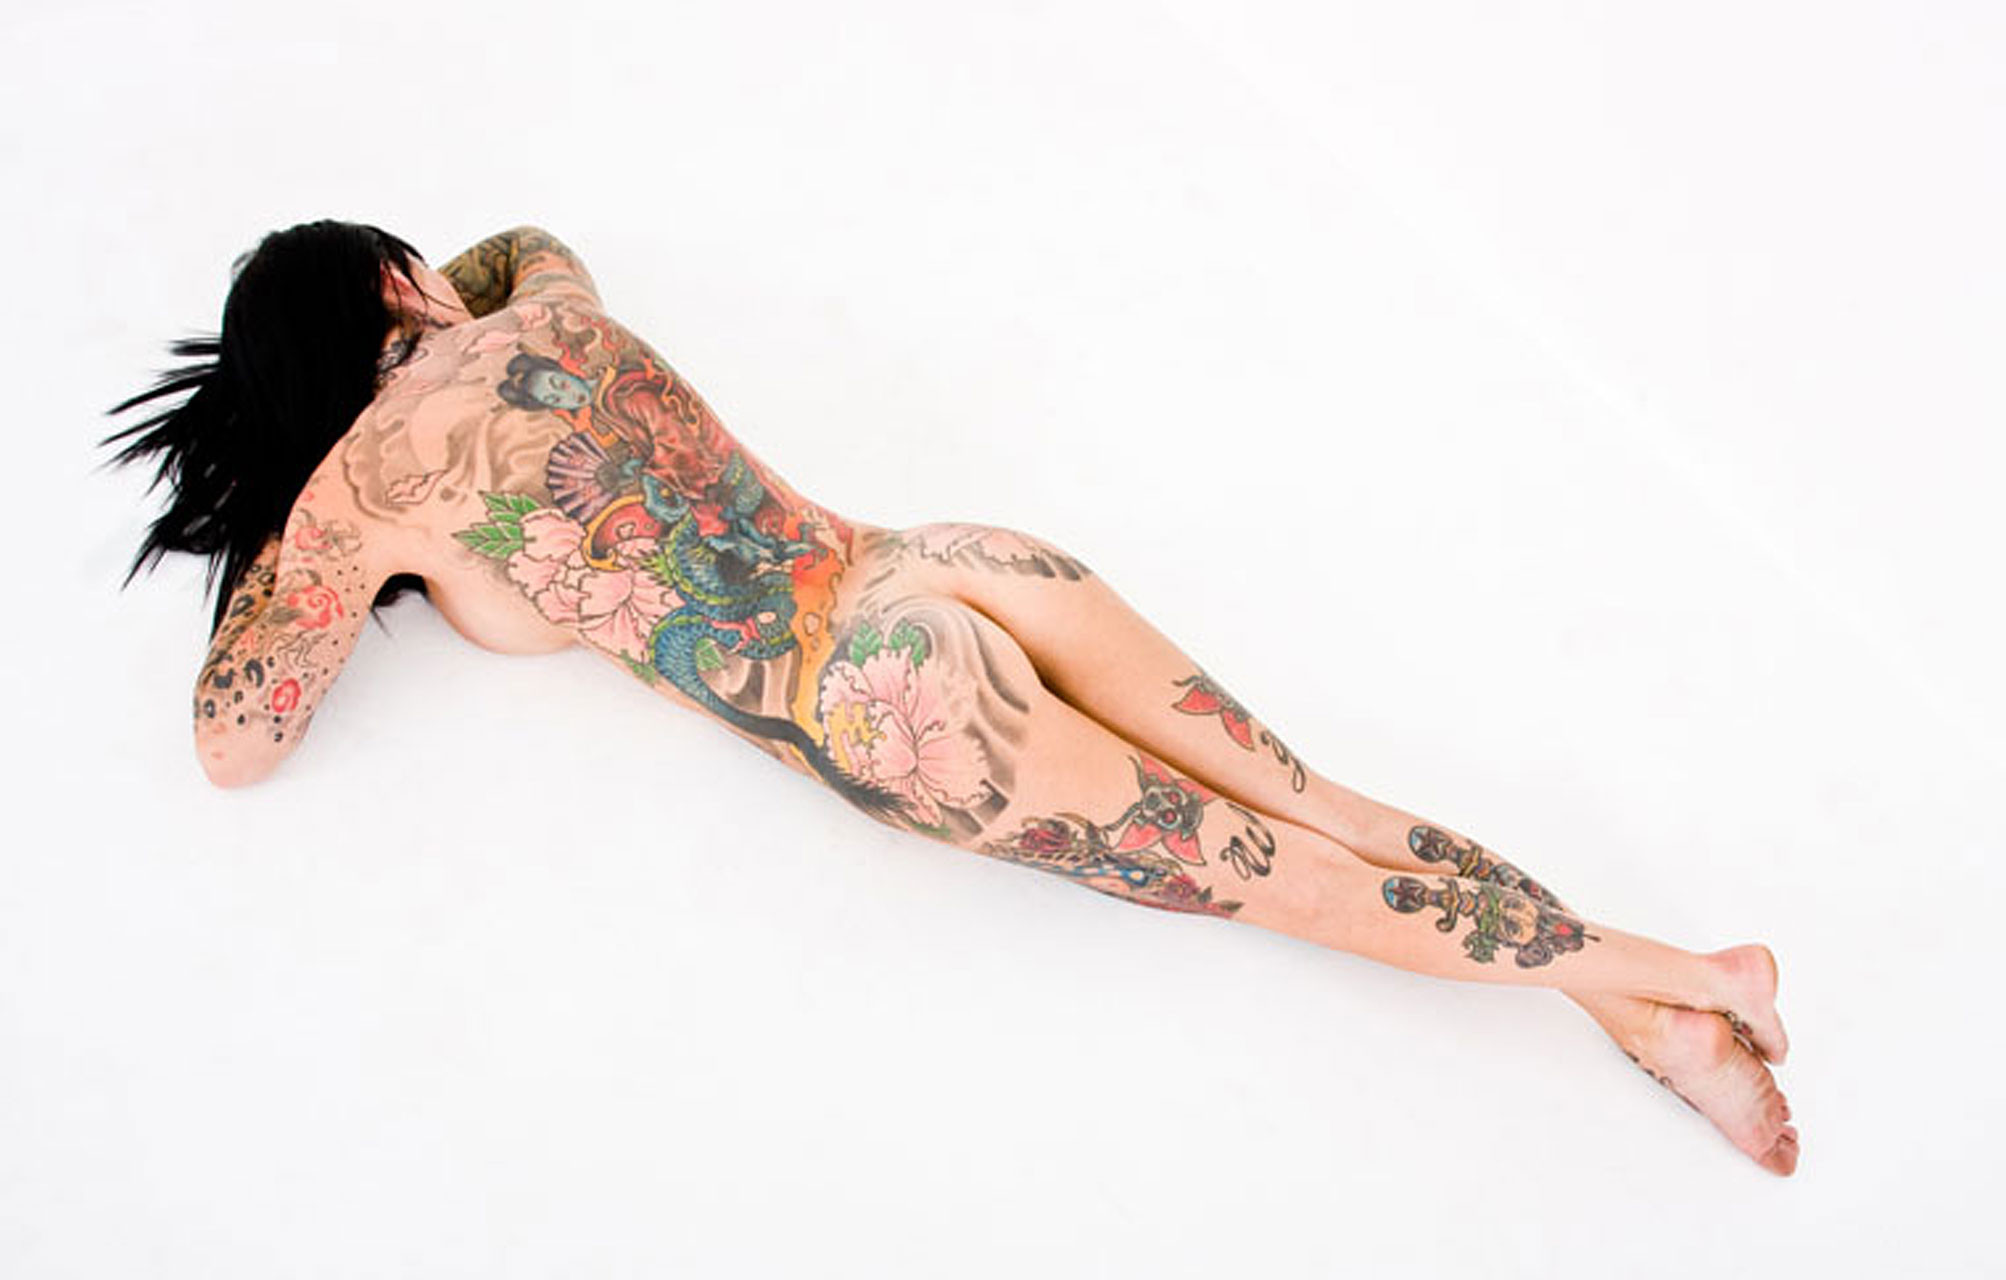 Michelle Bombshell showing her nude body and her tattoos #75355698